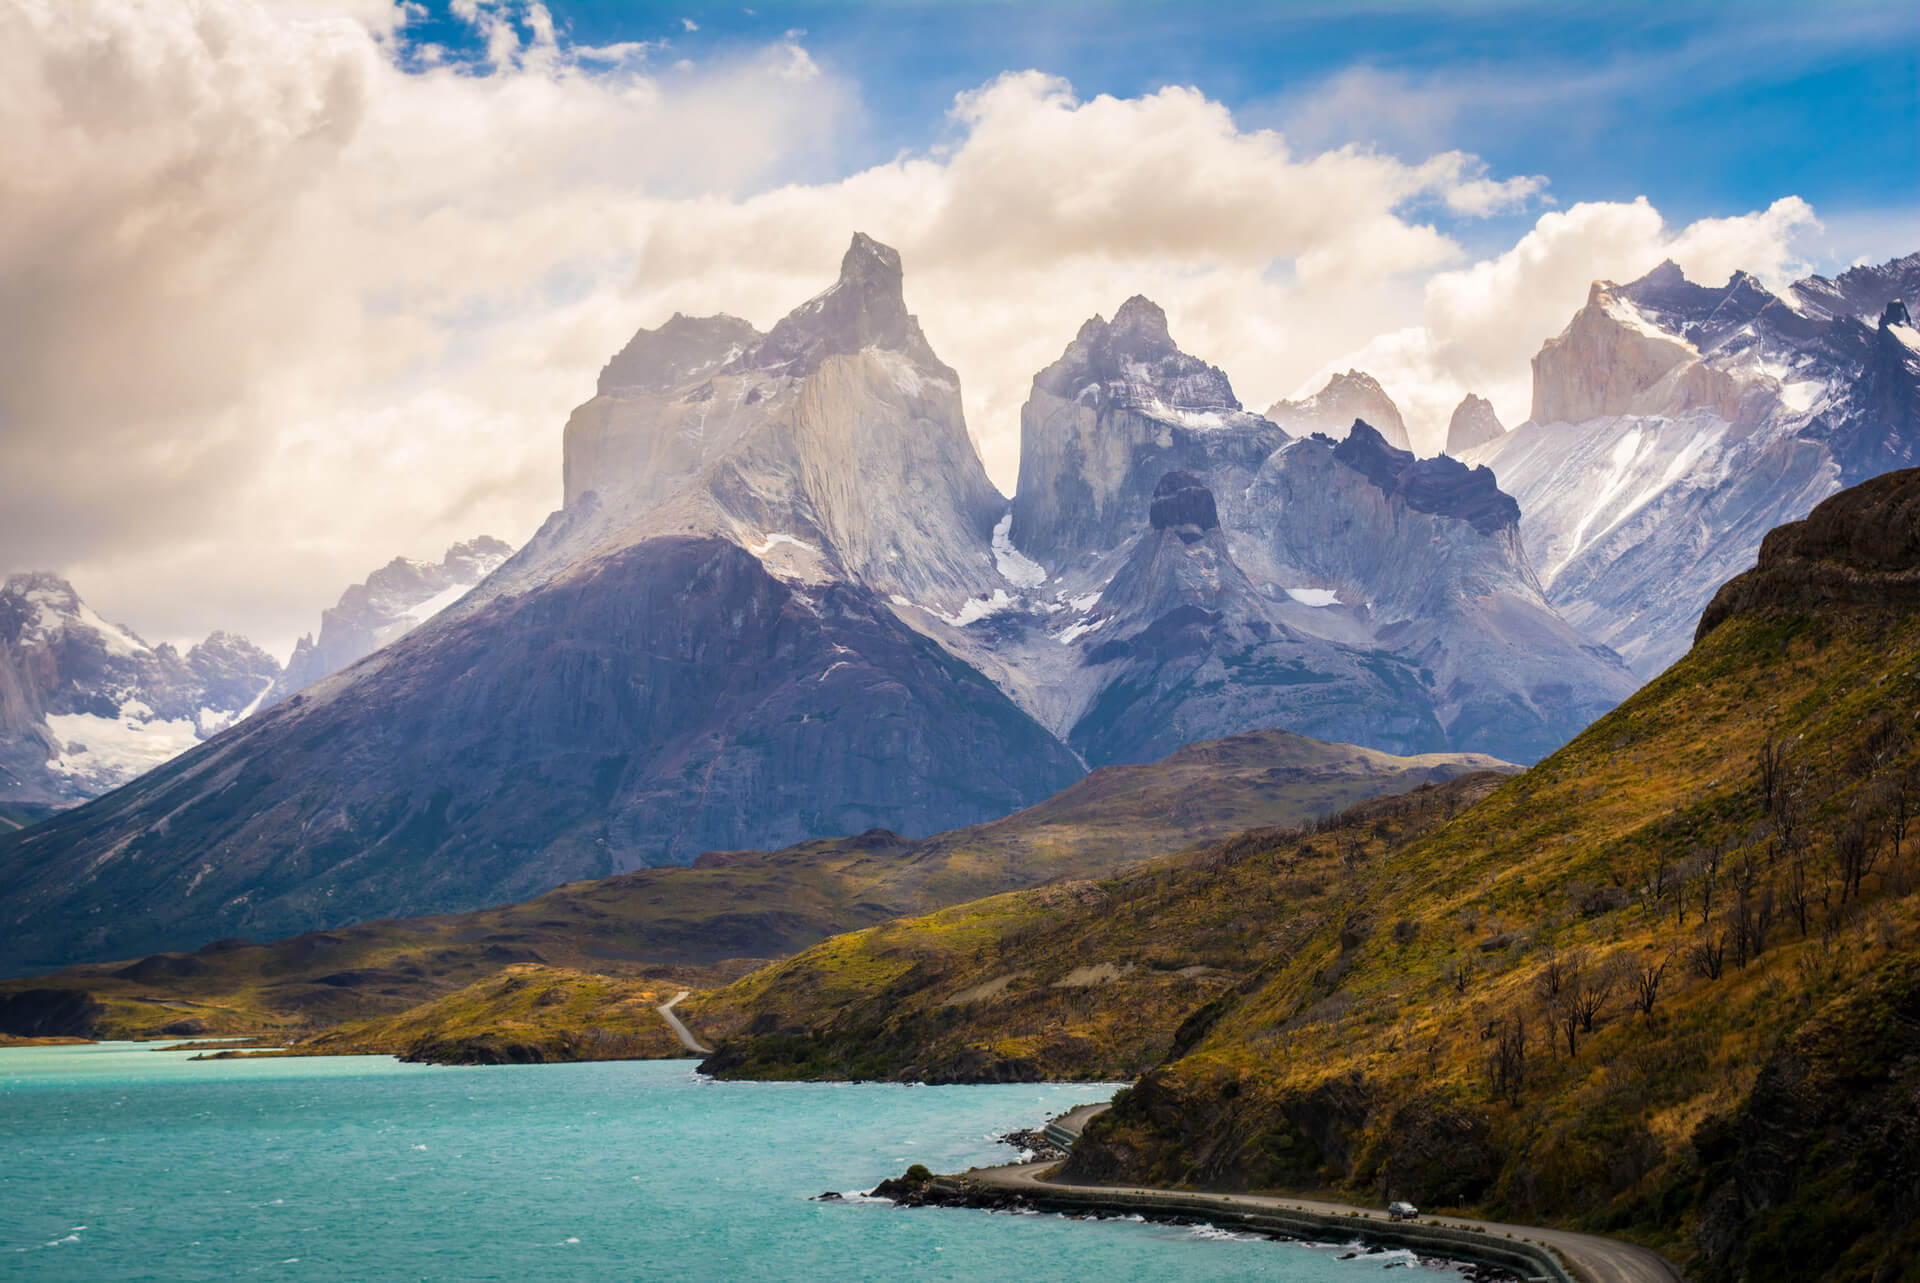 All You Need to Know Before Hiking the W Trek in Patagonia (2023 Upd.)